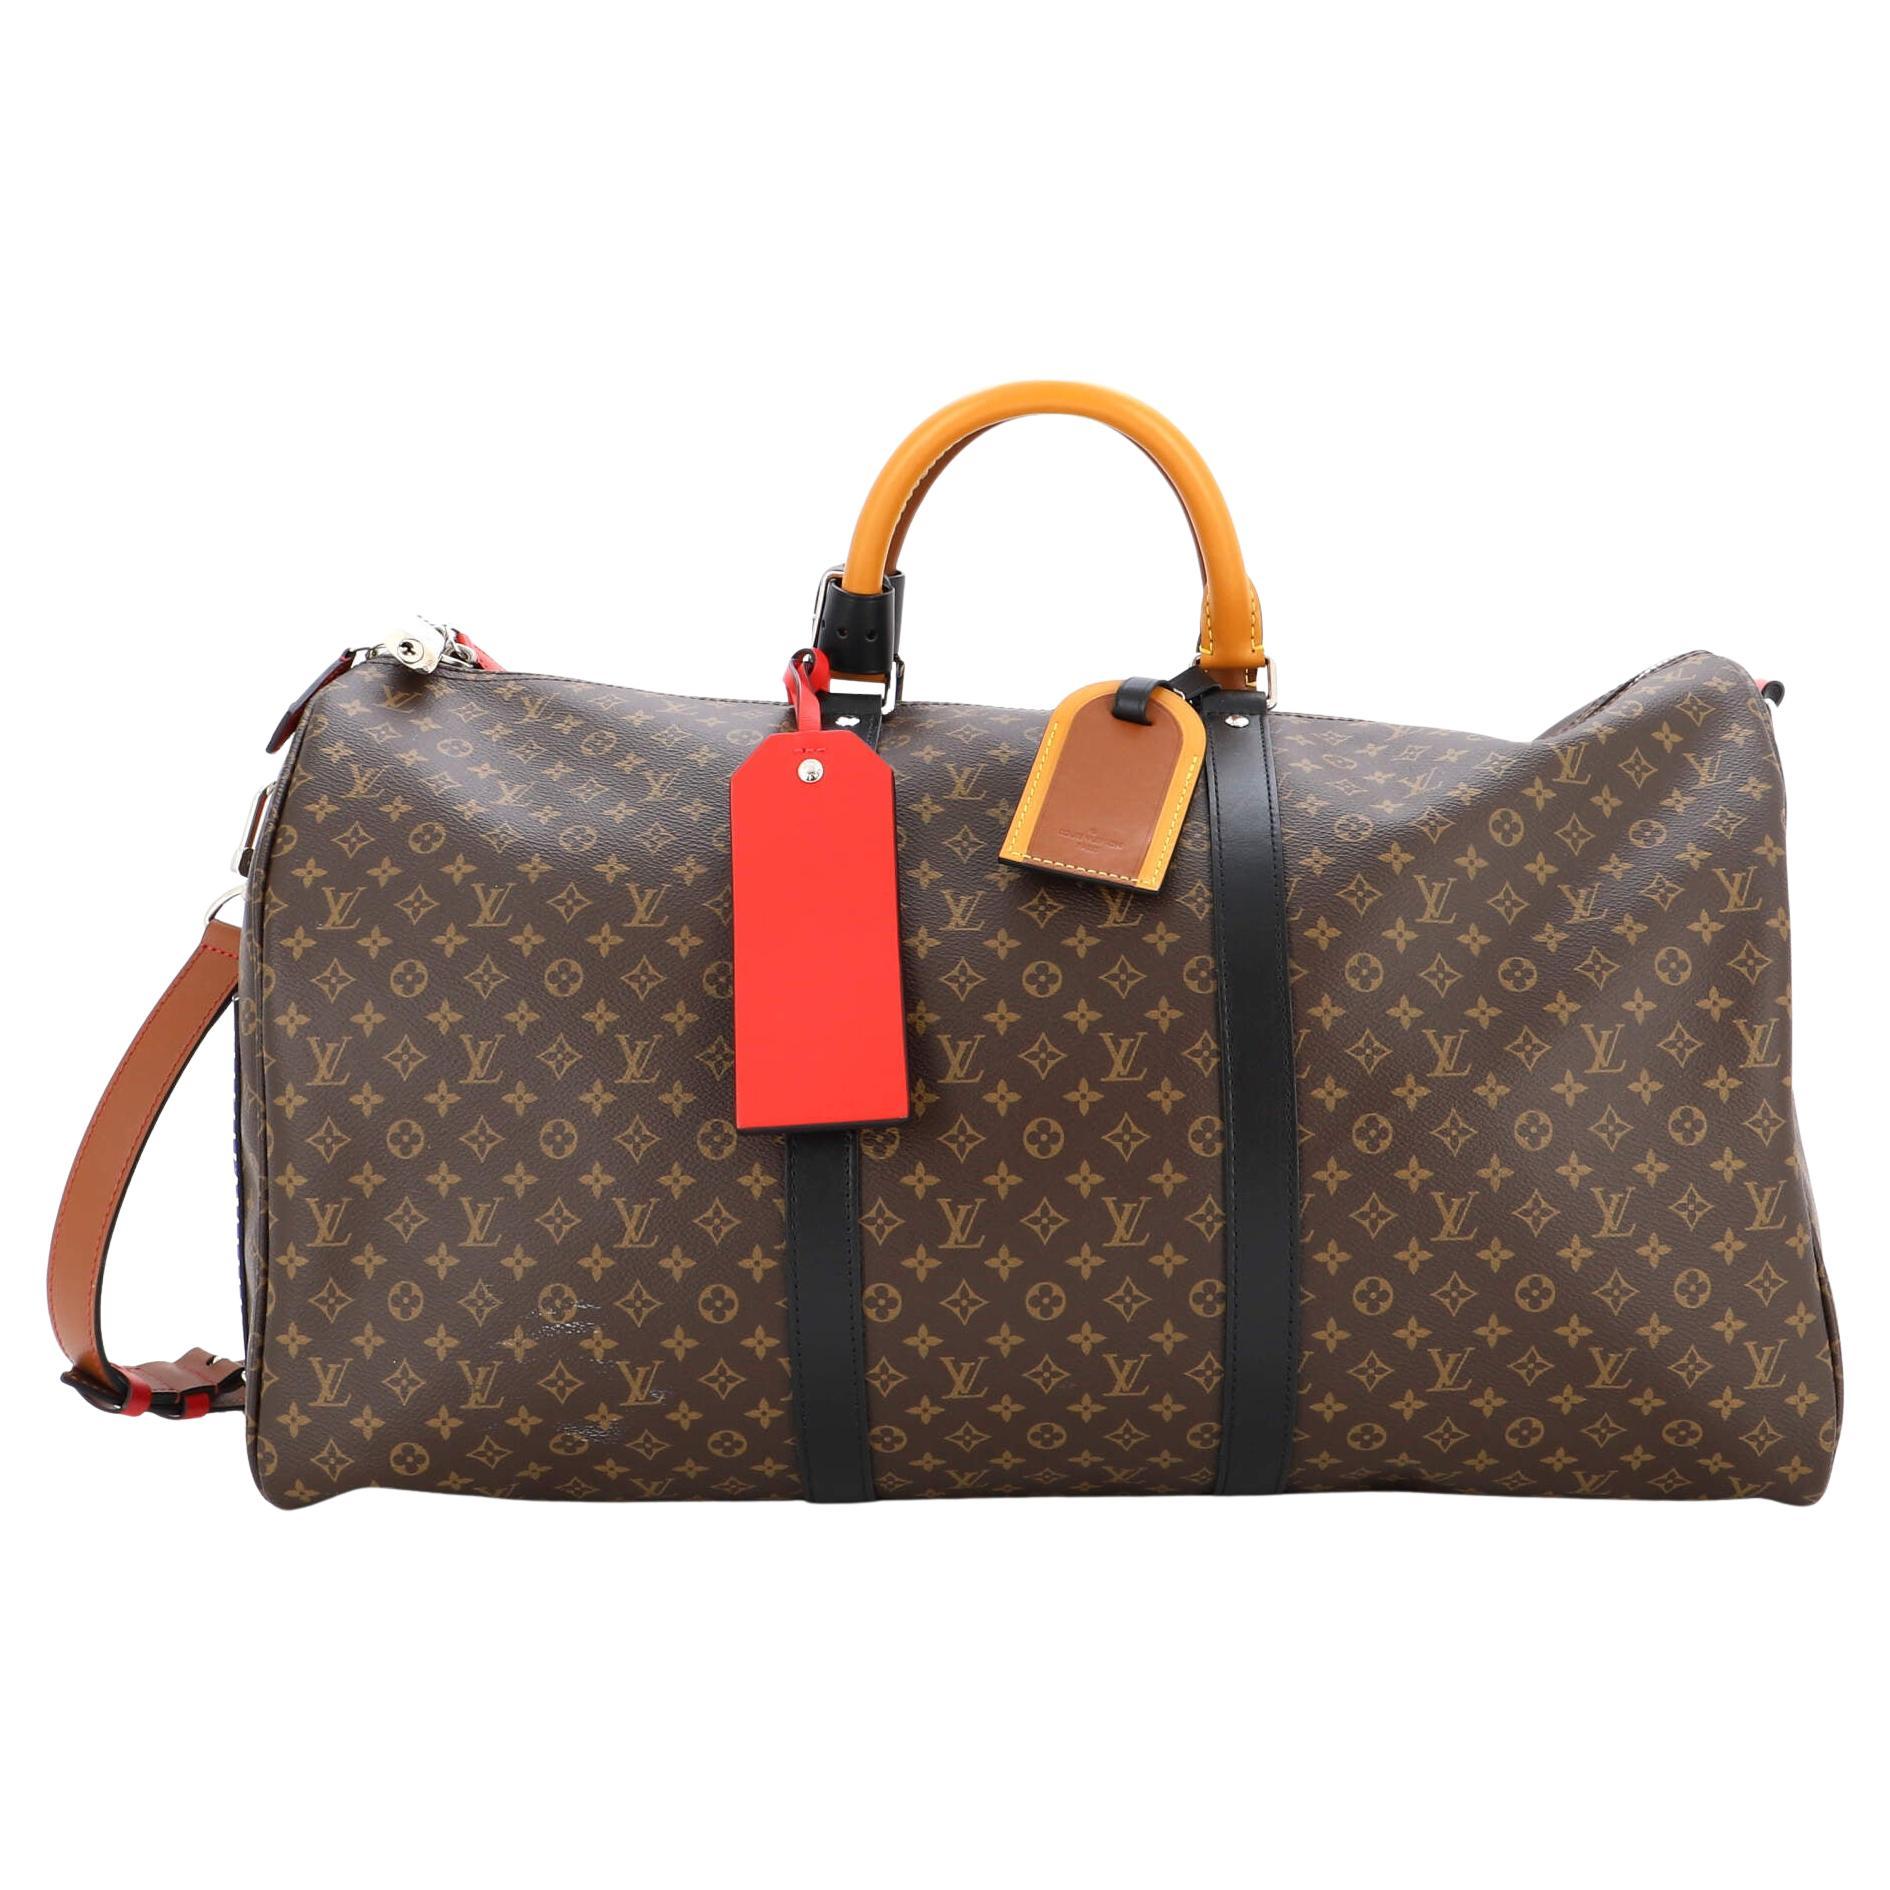 Real Vs Fake what are the 10 differences between these 2 Louis Vuitton  Keepall 45 monogram bag 